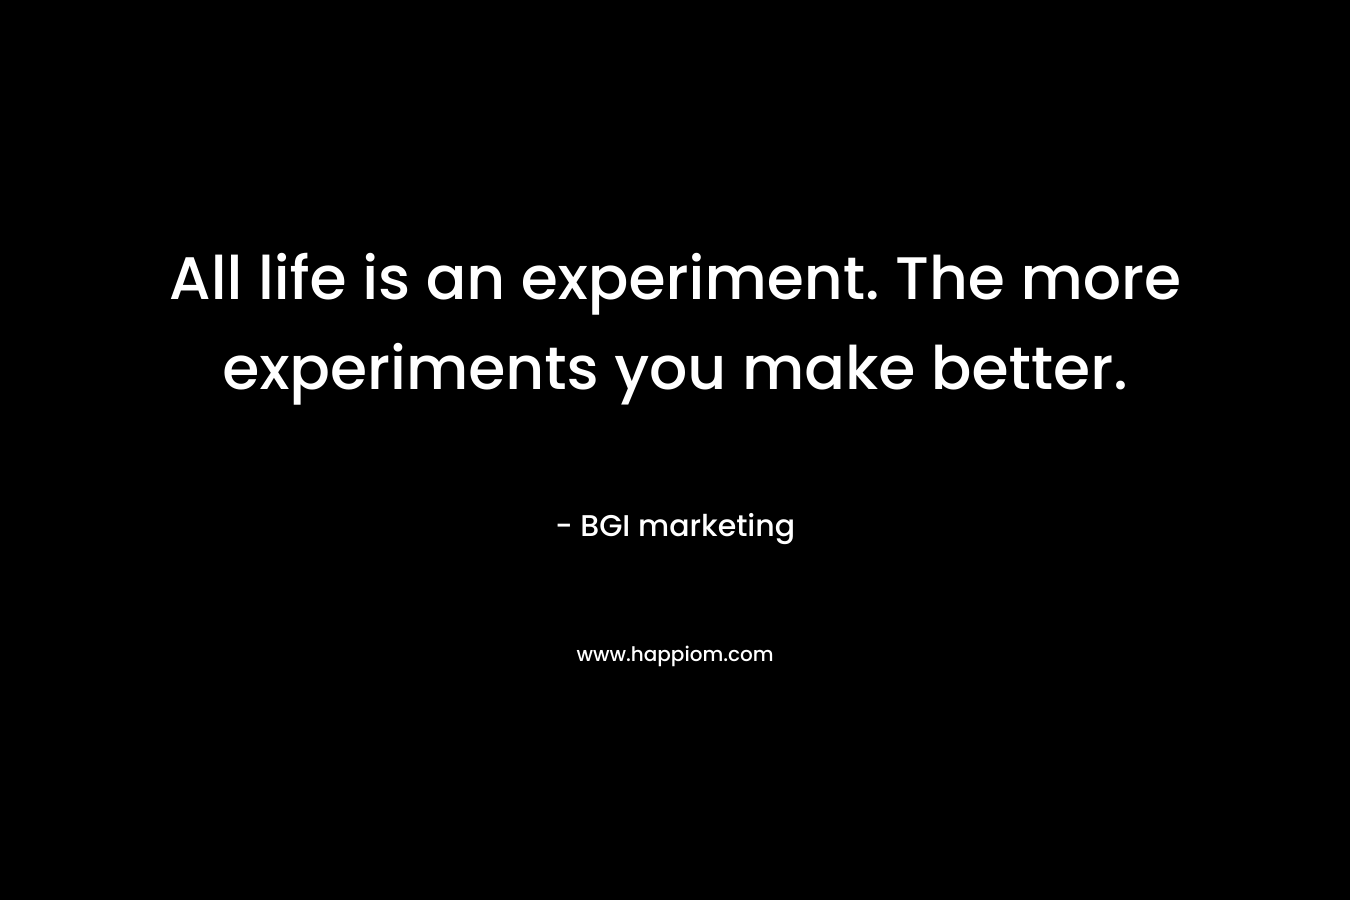 All life is an experiment. The more experiments you make better. – BGI marketing